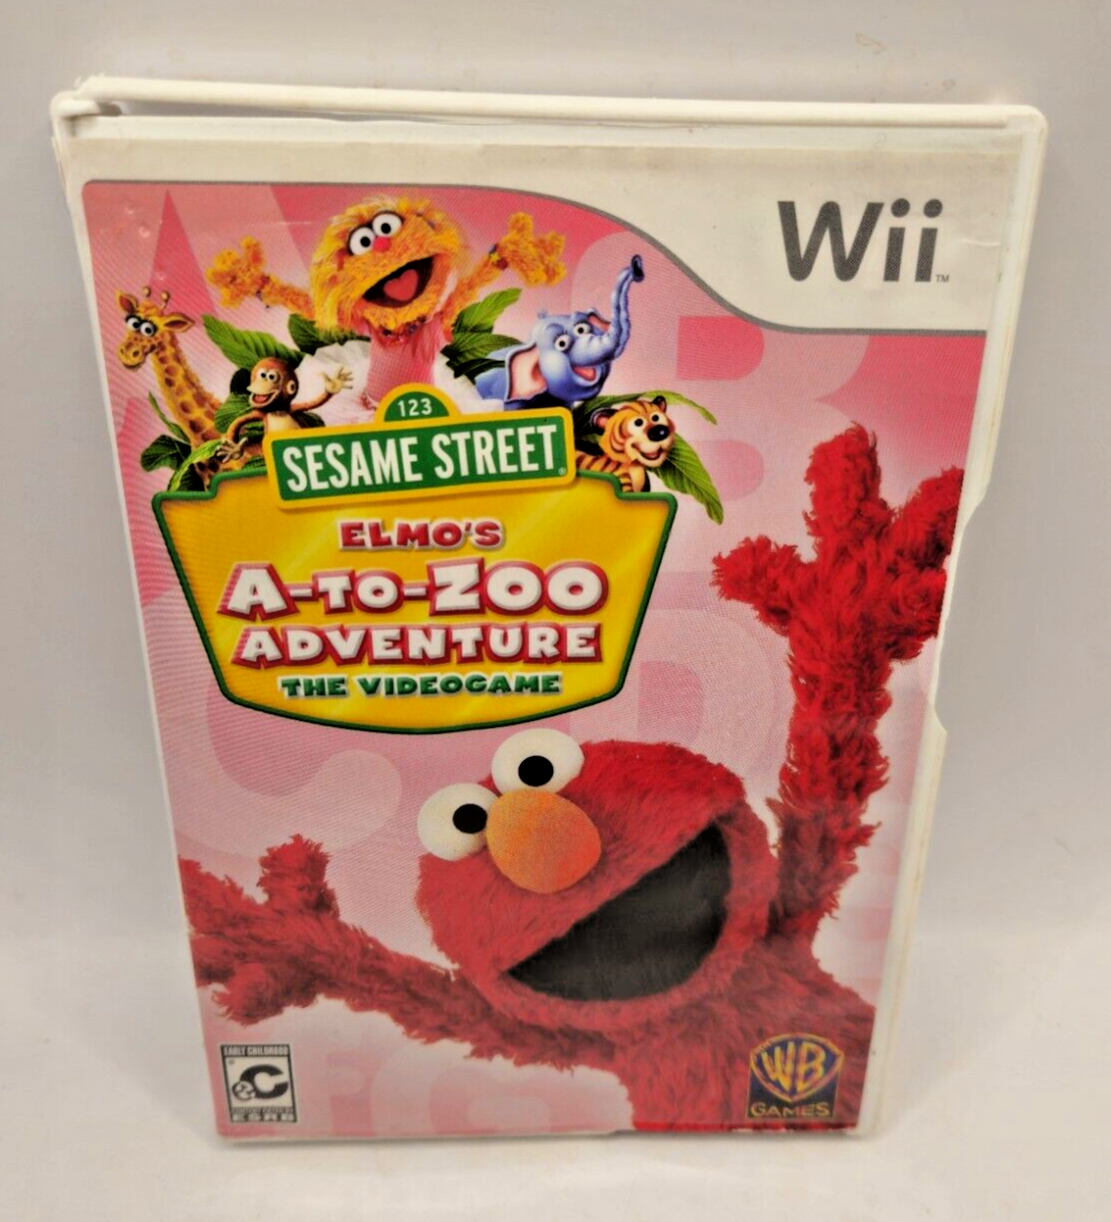 Primary image for Sesame Street:Elmo's A-to-Zoo Adventure The Videogame Nintendo Wii, 2010